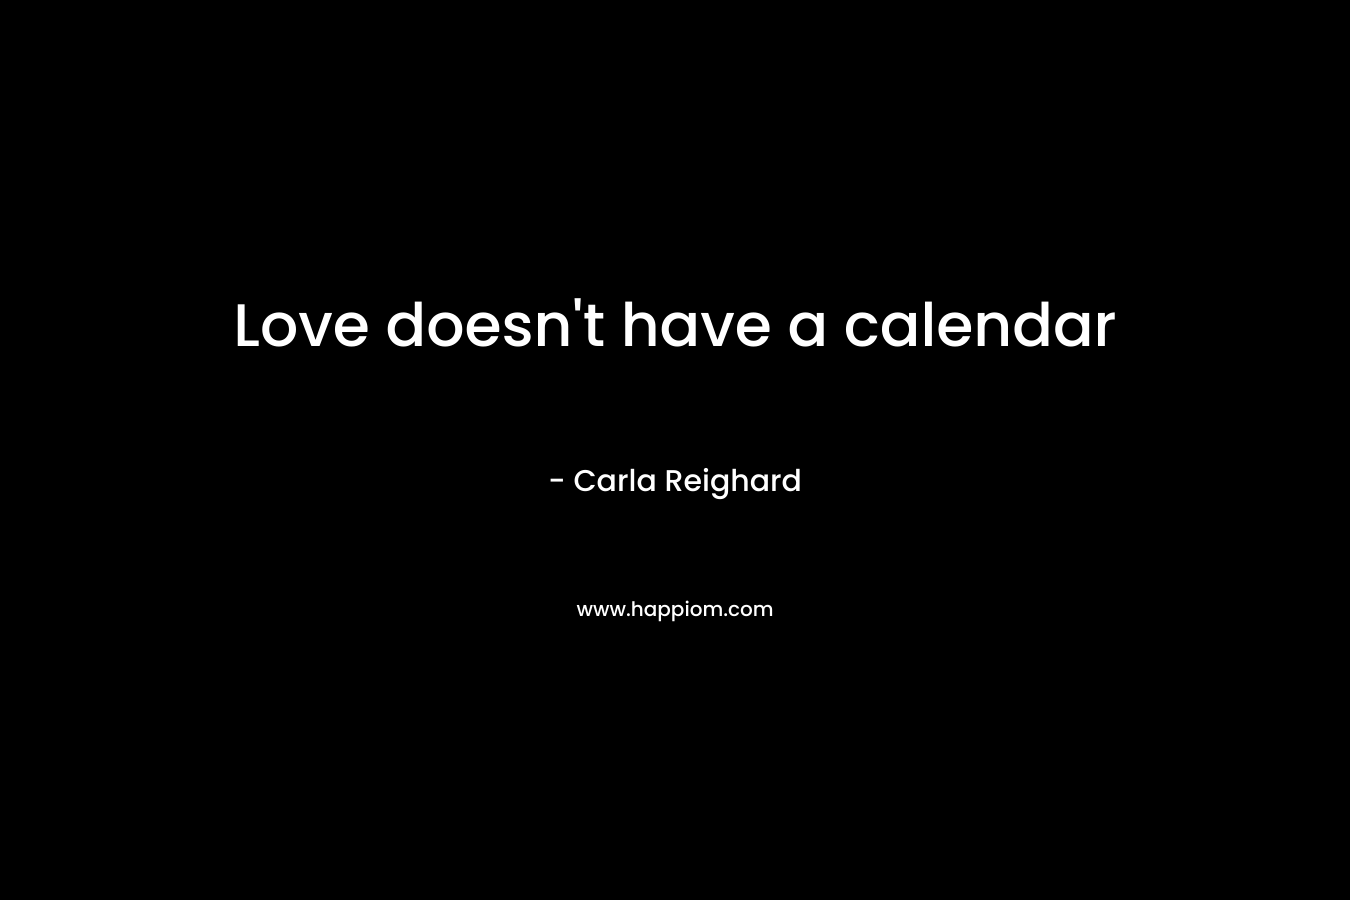 Love doesn't have a calendar